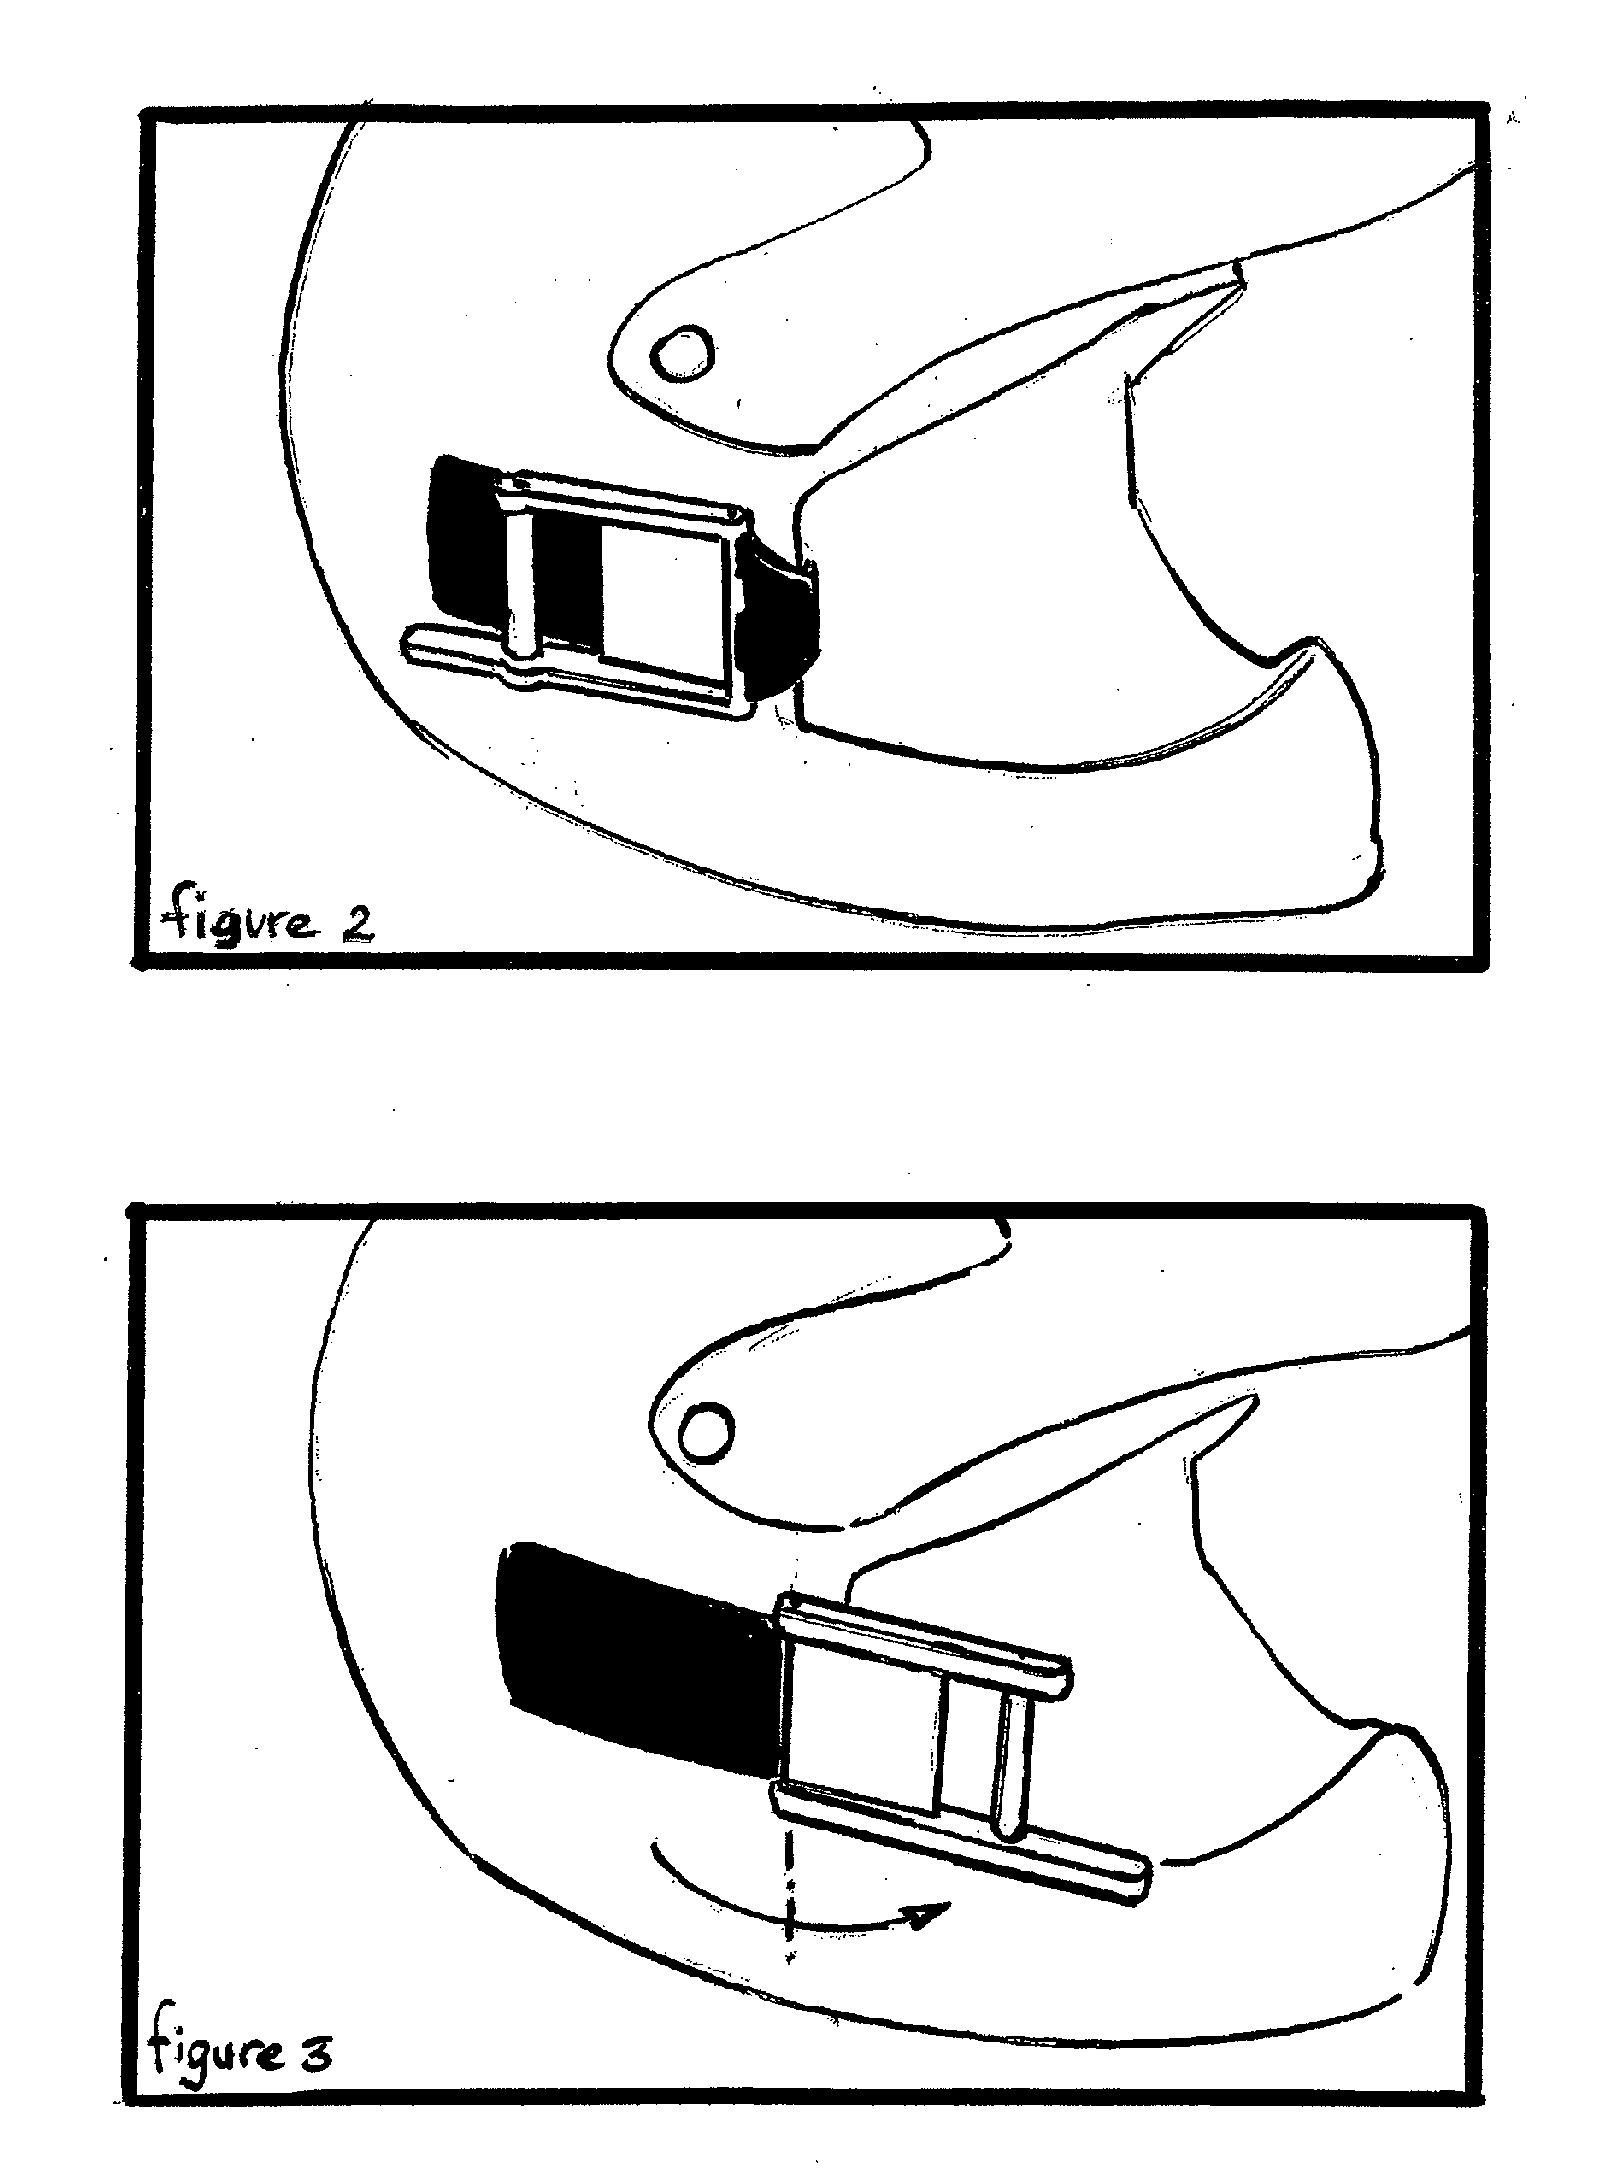 Device for separating, and maintaining a distance between, a person's face and a protective eye mask held in place by an elastic strap (ski or motocross type)